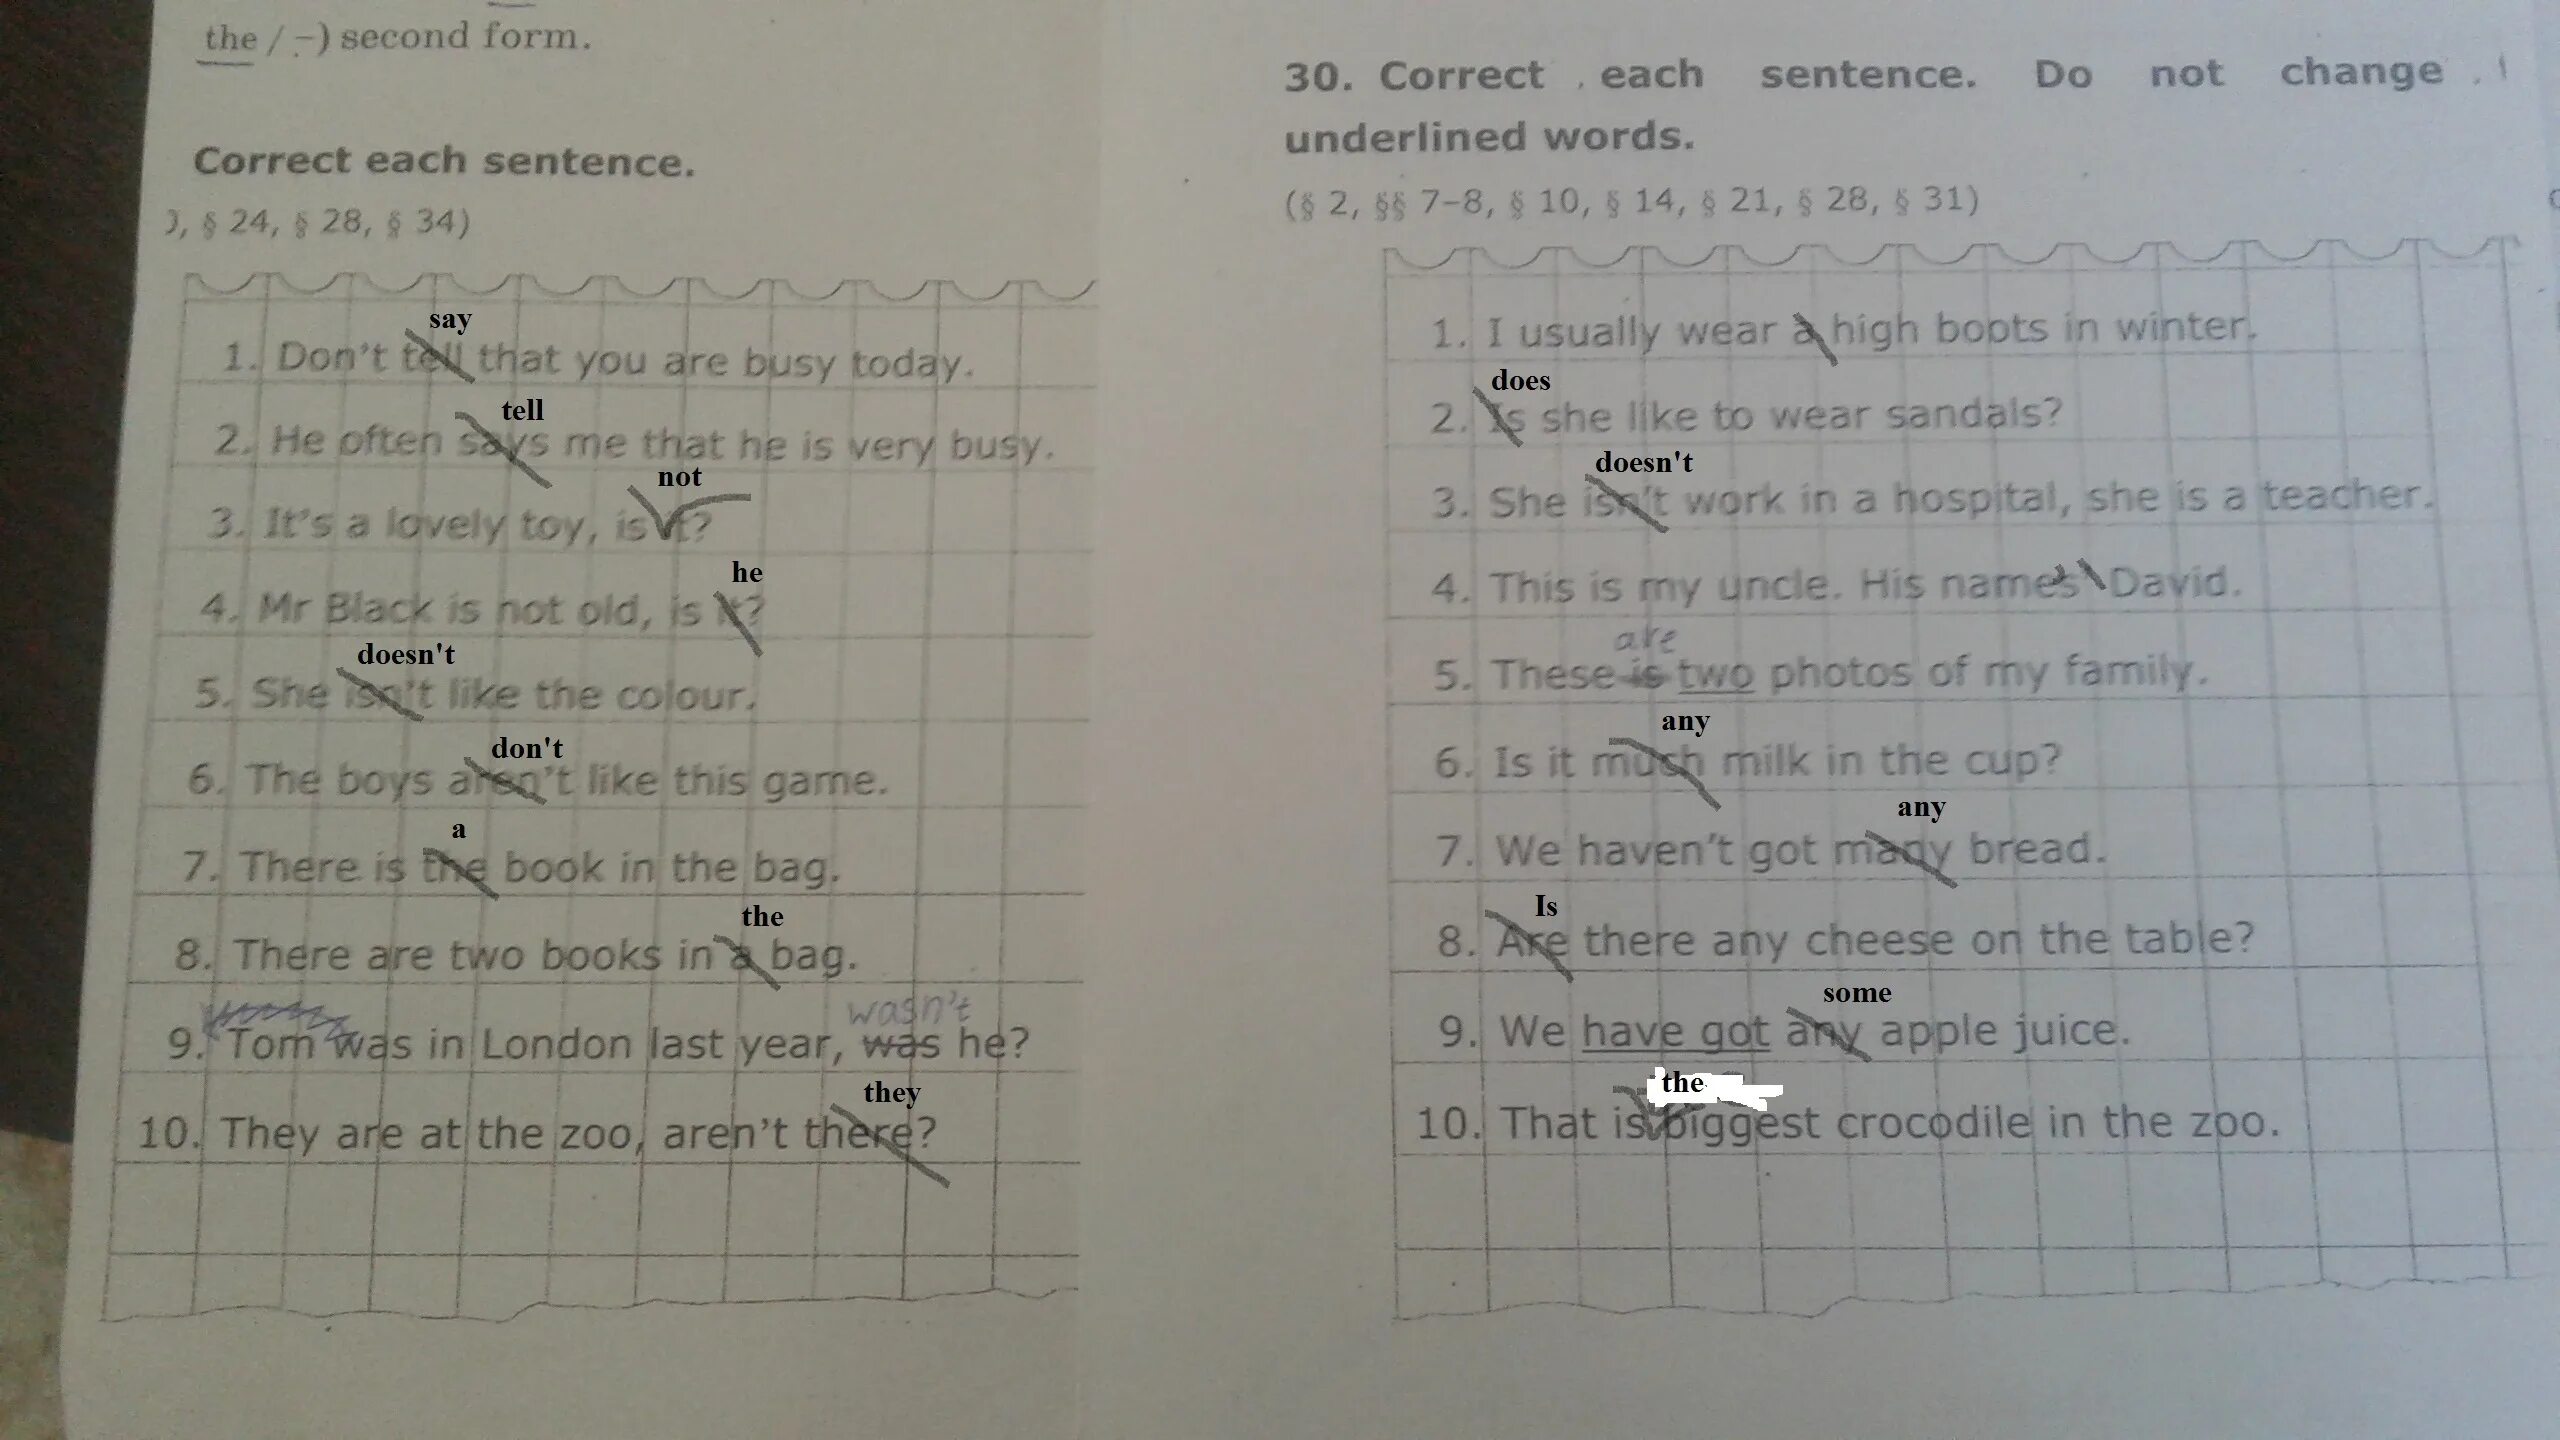 Correct each sentence перевод. Correct each sentence do not change the underlined Words. Correct each sentence do not change the underlined Words i Wonder where are they. 150. Correct each sentence. Do not change the underlined Words. ($$ 12-13, $ 36, § 40, § 42)Your Dog never Plays, doesn't it?.